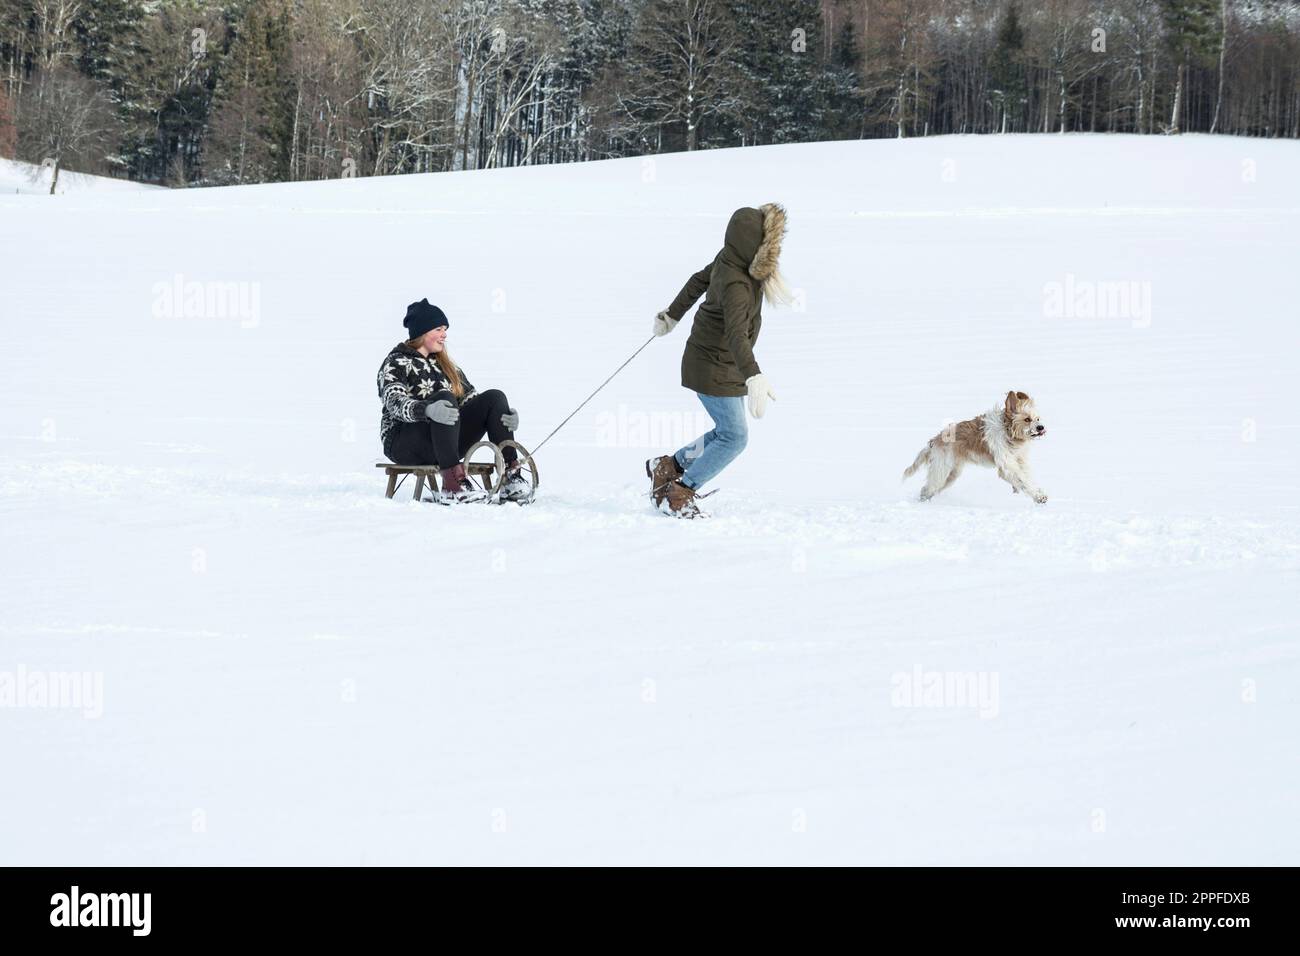 Two girls and a dog with slide in snowy landscape in winter, Bavaria, Germany Stock Photo